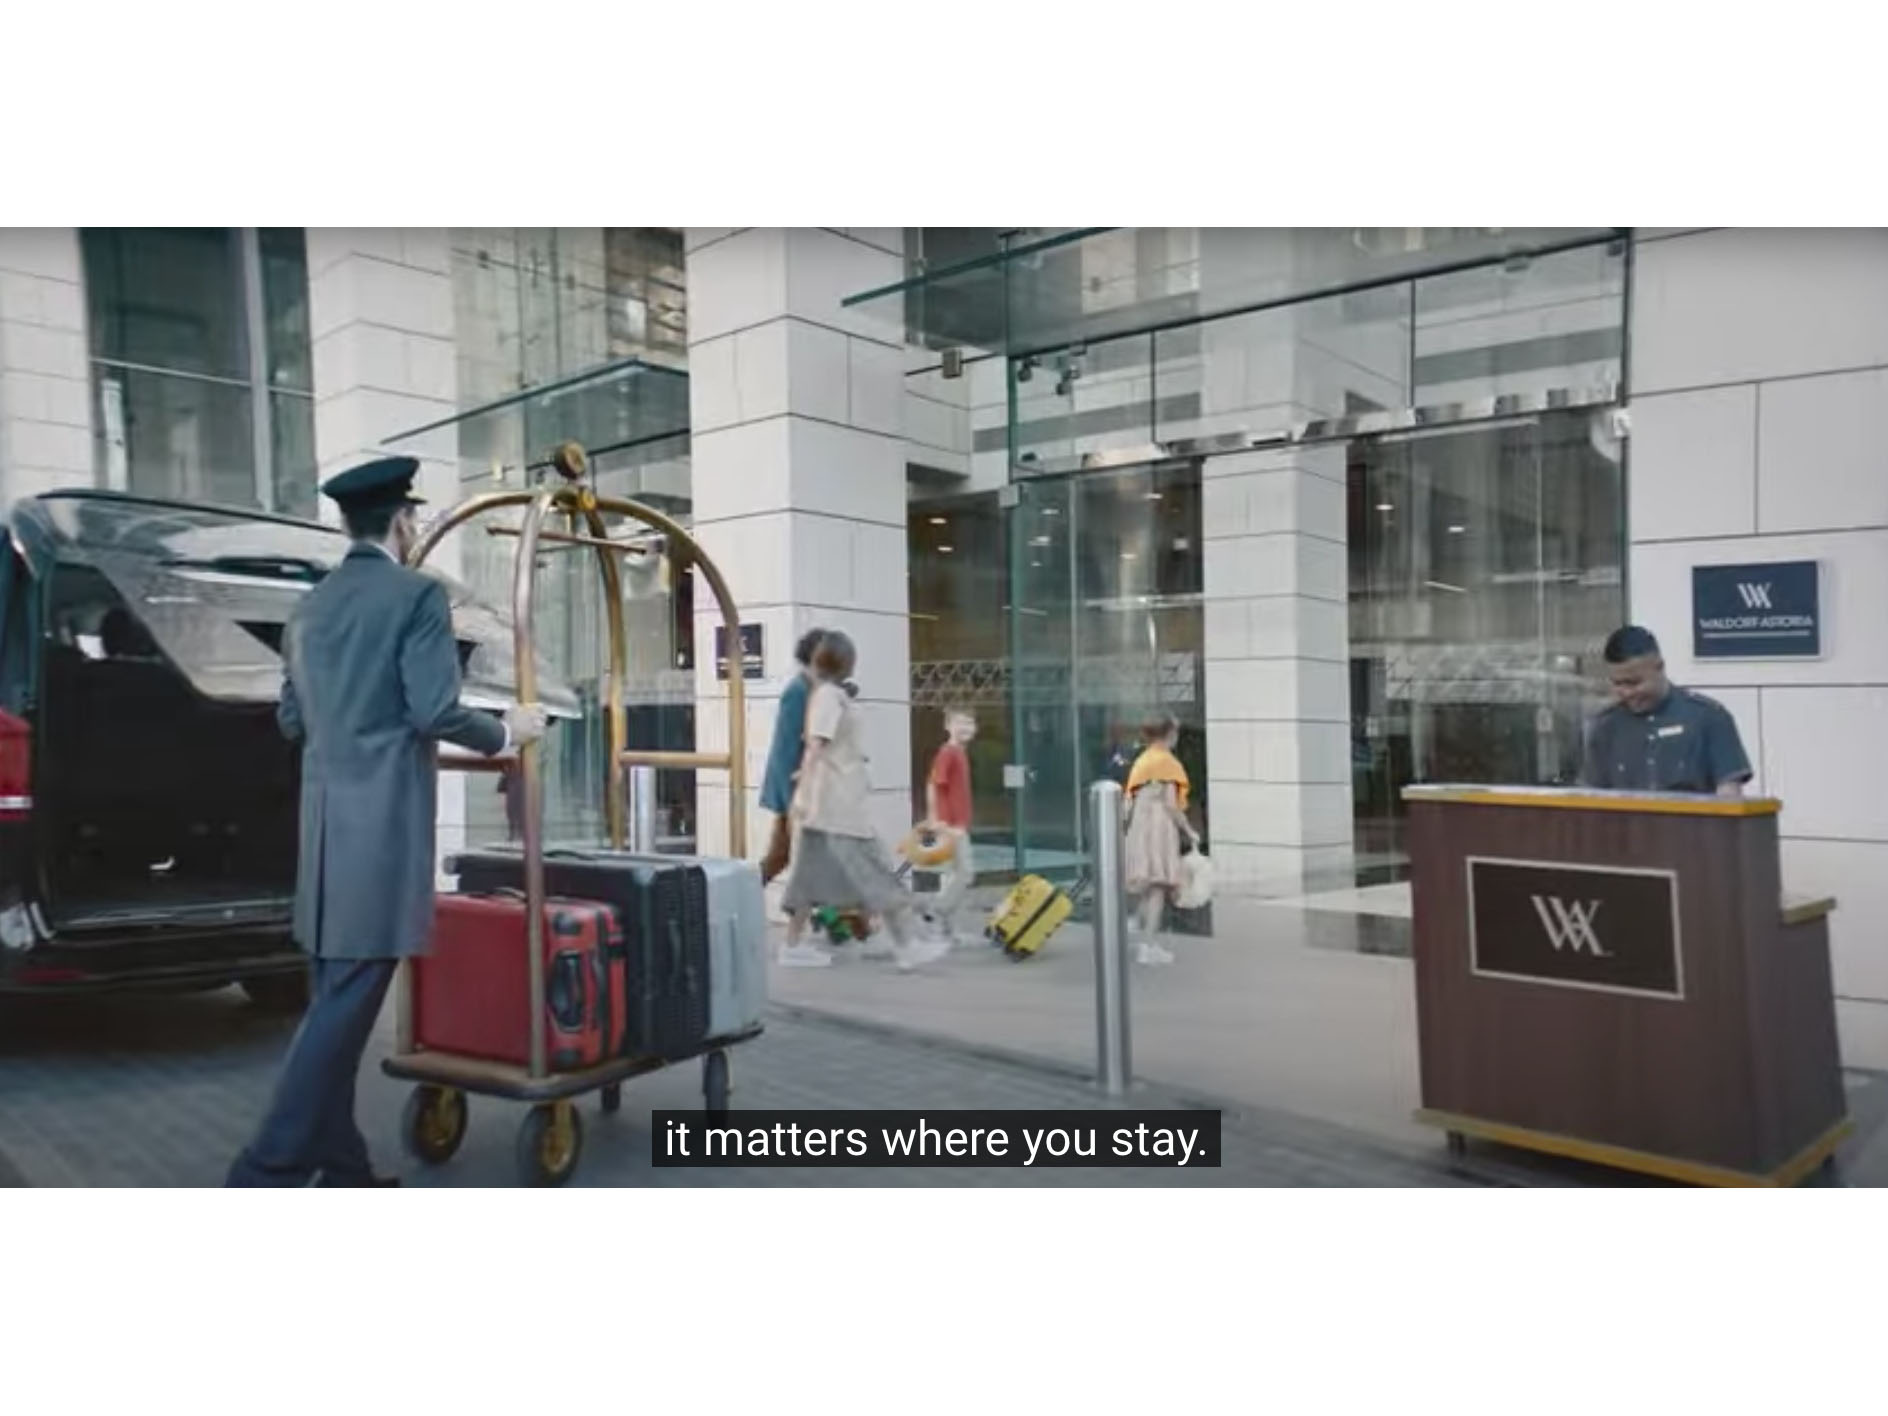 Hilton and TBWA\RAAD highlight the crucial elements at the heart of every great stay in new Middle East campaign